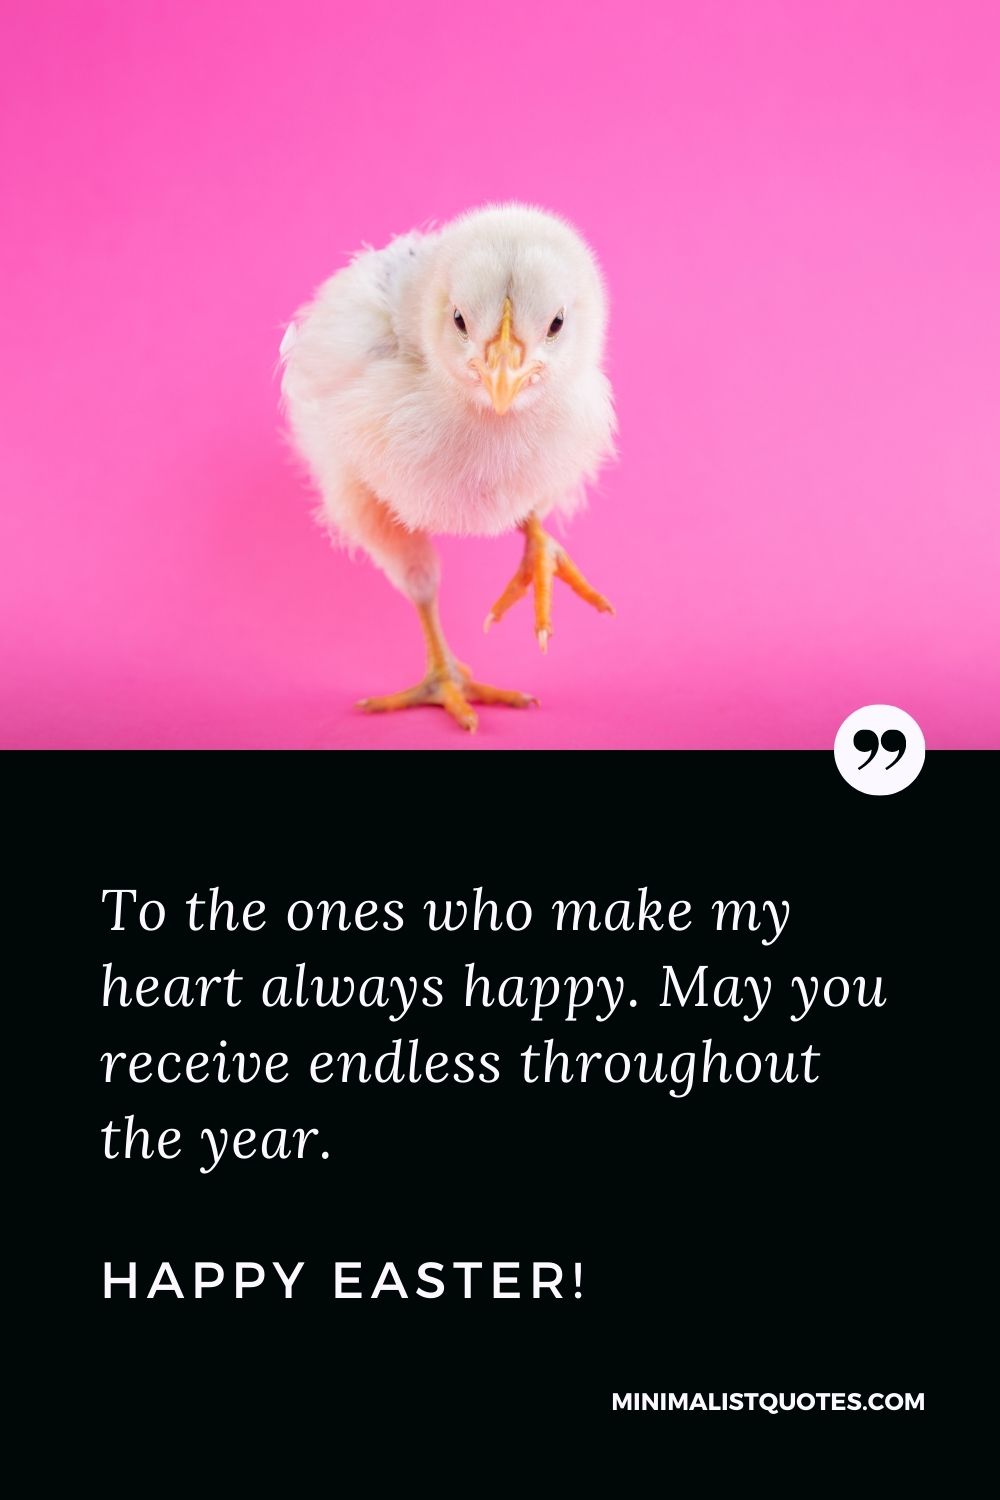 Easter Quote, Wish & Message With Image: To the ones who make my heart always happy. May you receive endless throughout the year. Happy Easter!